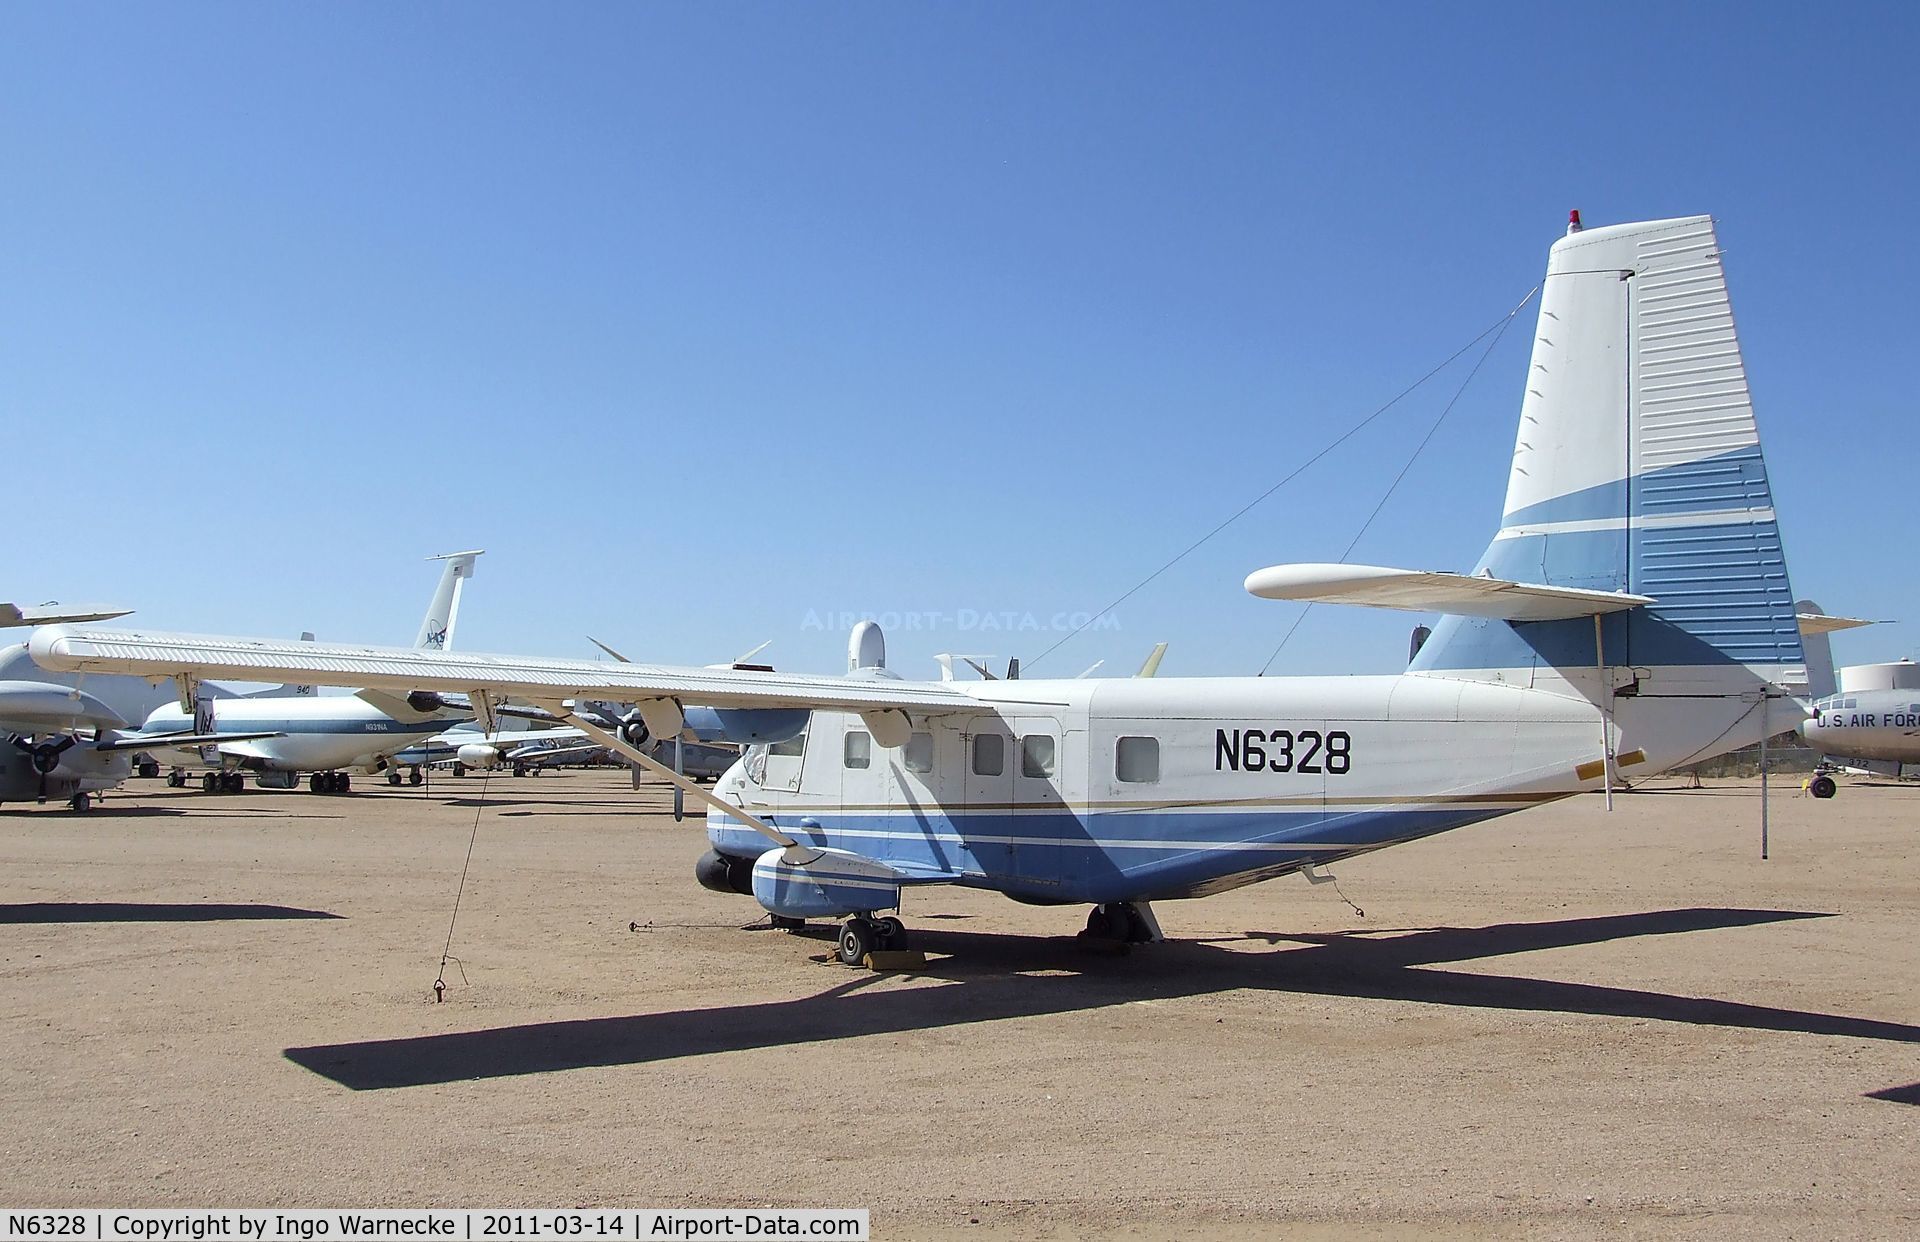 N6328, 1989 GAF N22S Searchmaster L C/N N22S-163, Government Aircraft Factories GAF N22S Nomad Searchmaster at the Pima Air & Space Museum, Tucson AZ